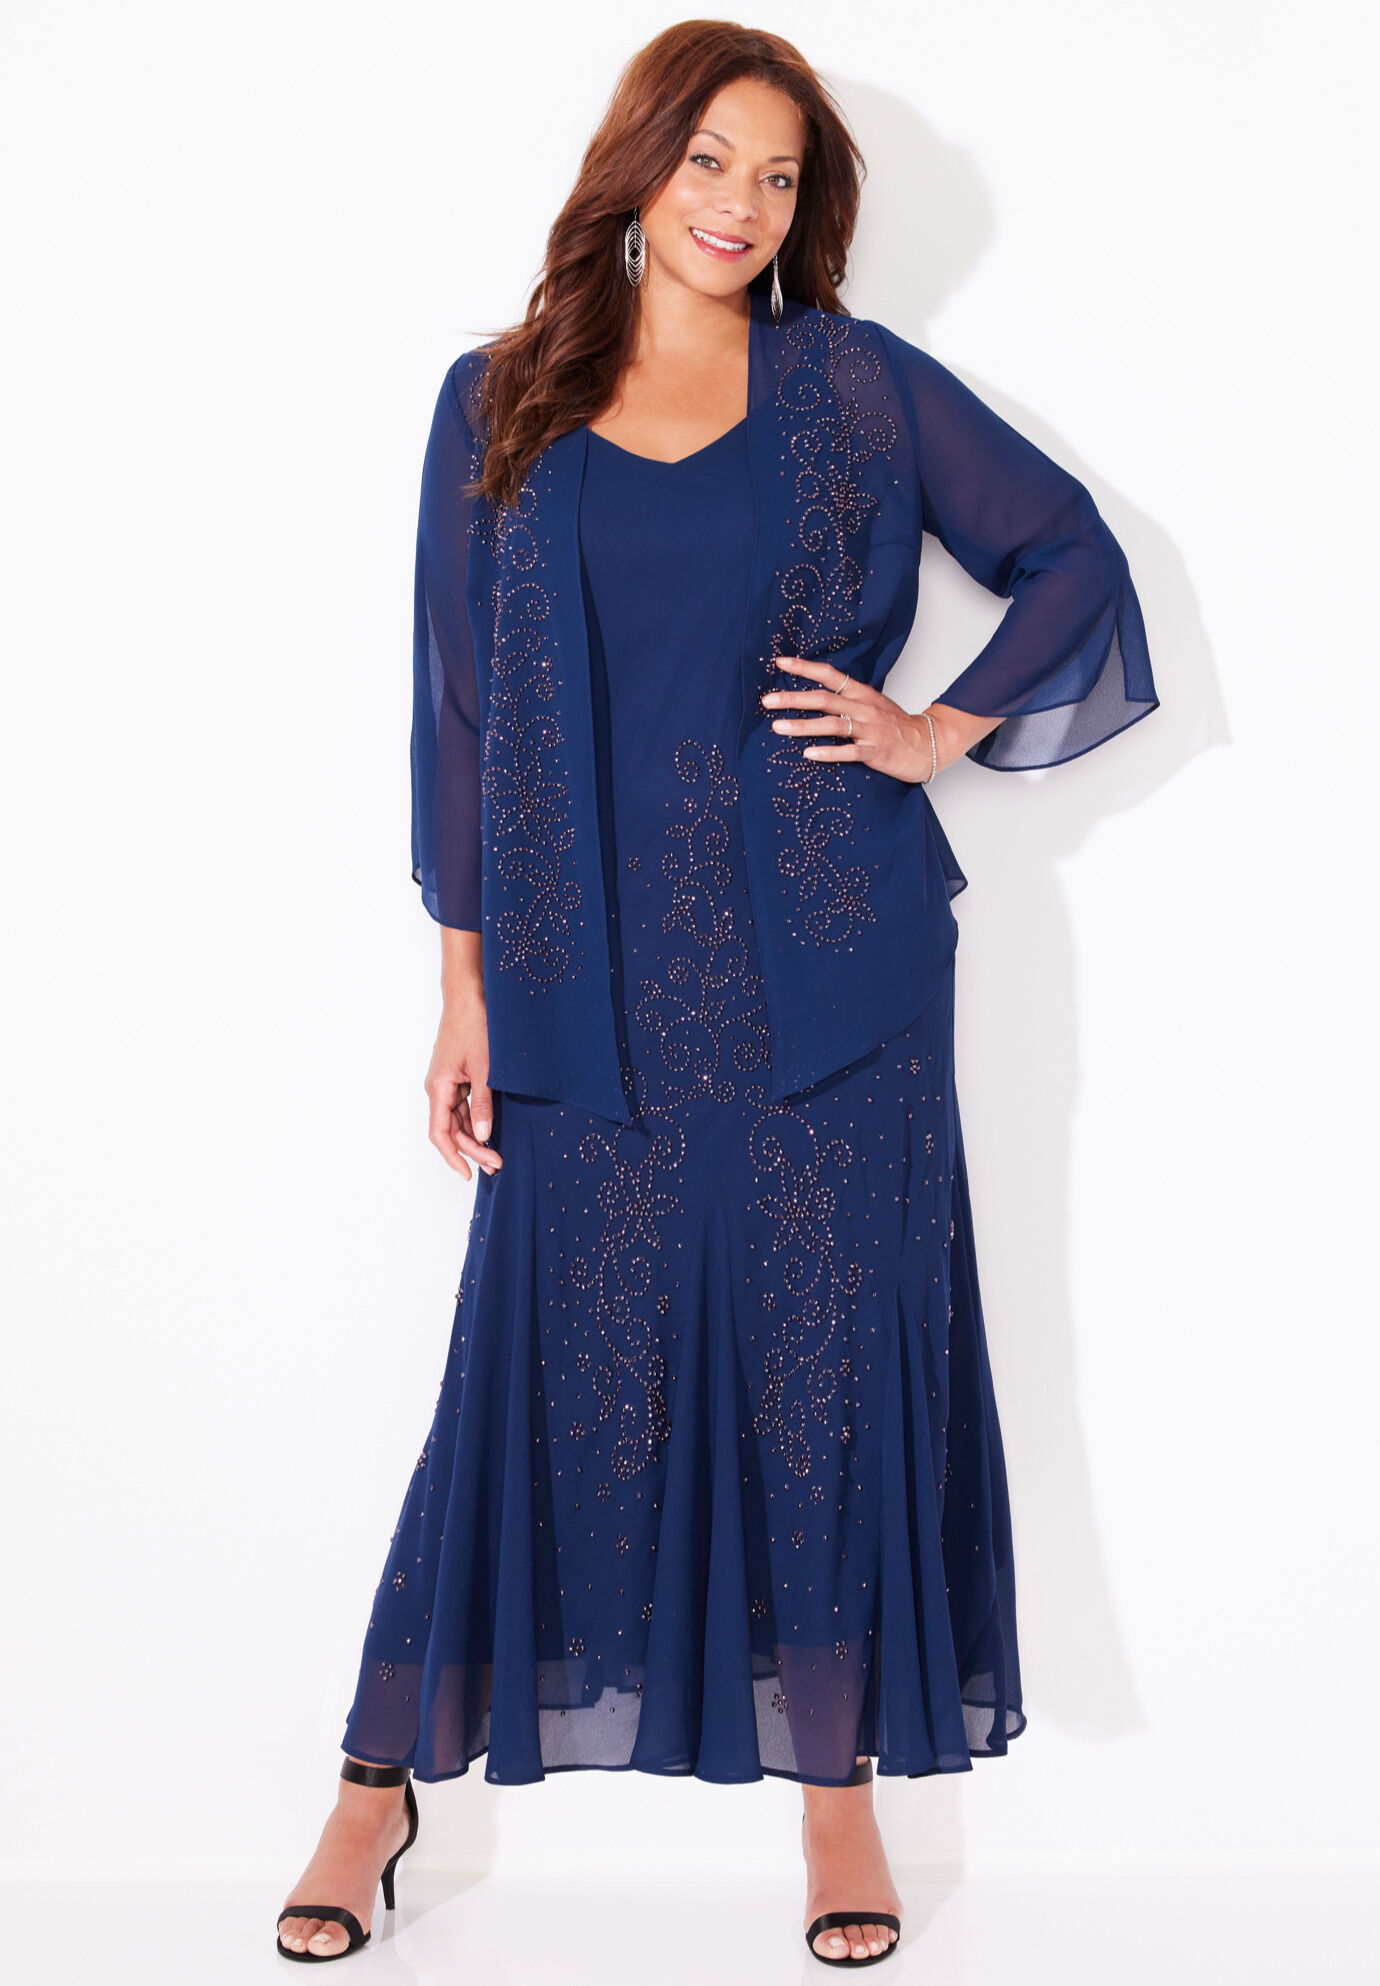 Plus Size Mother Of The Bride Dresses ...